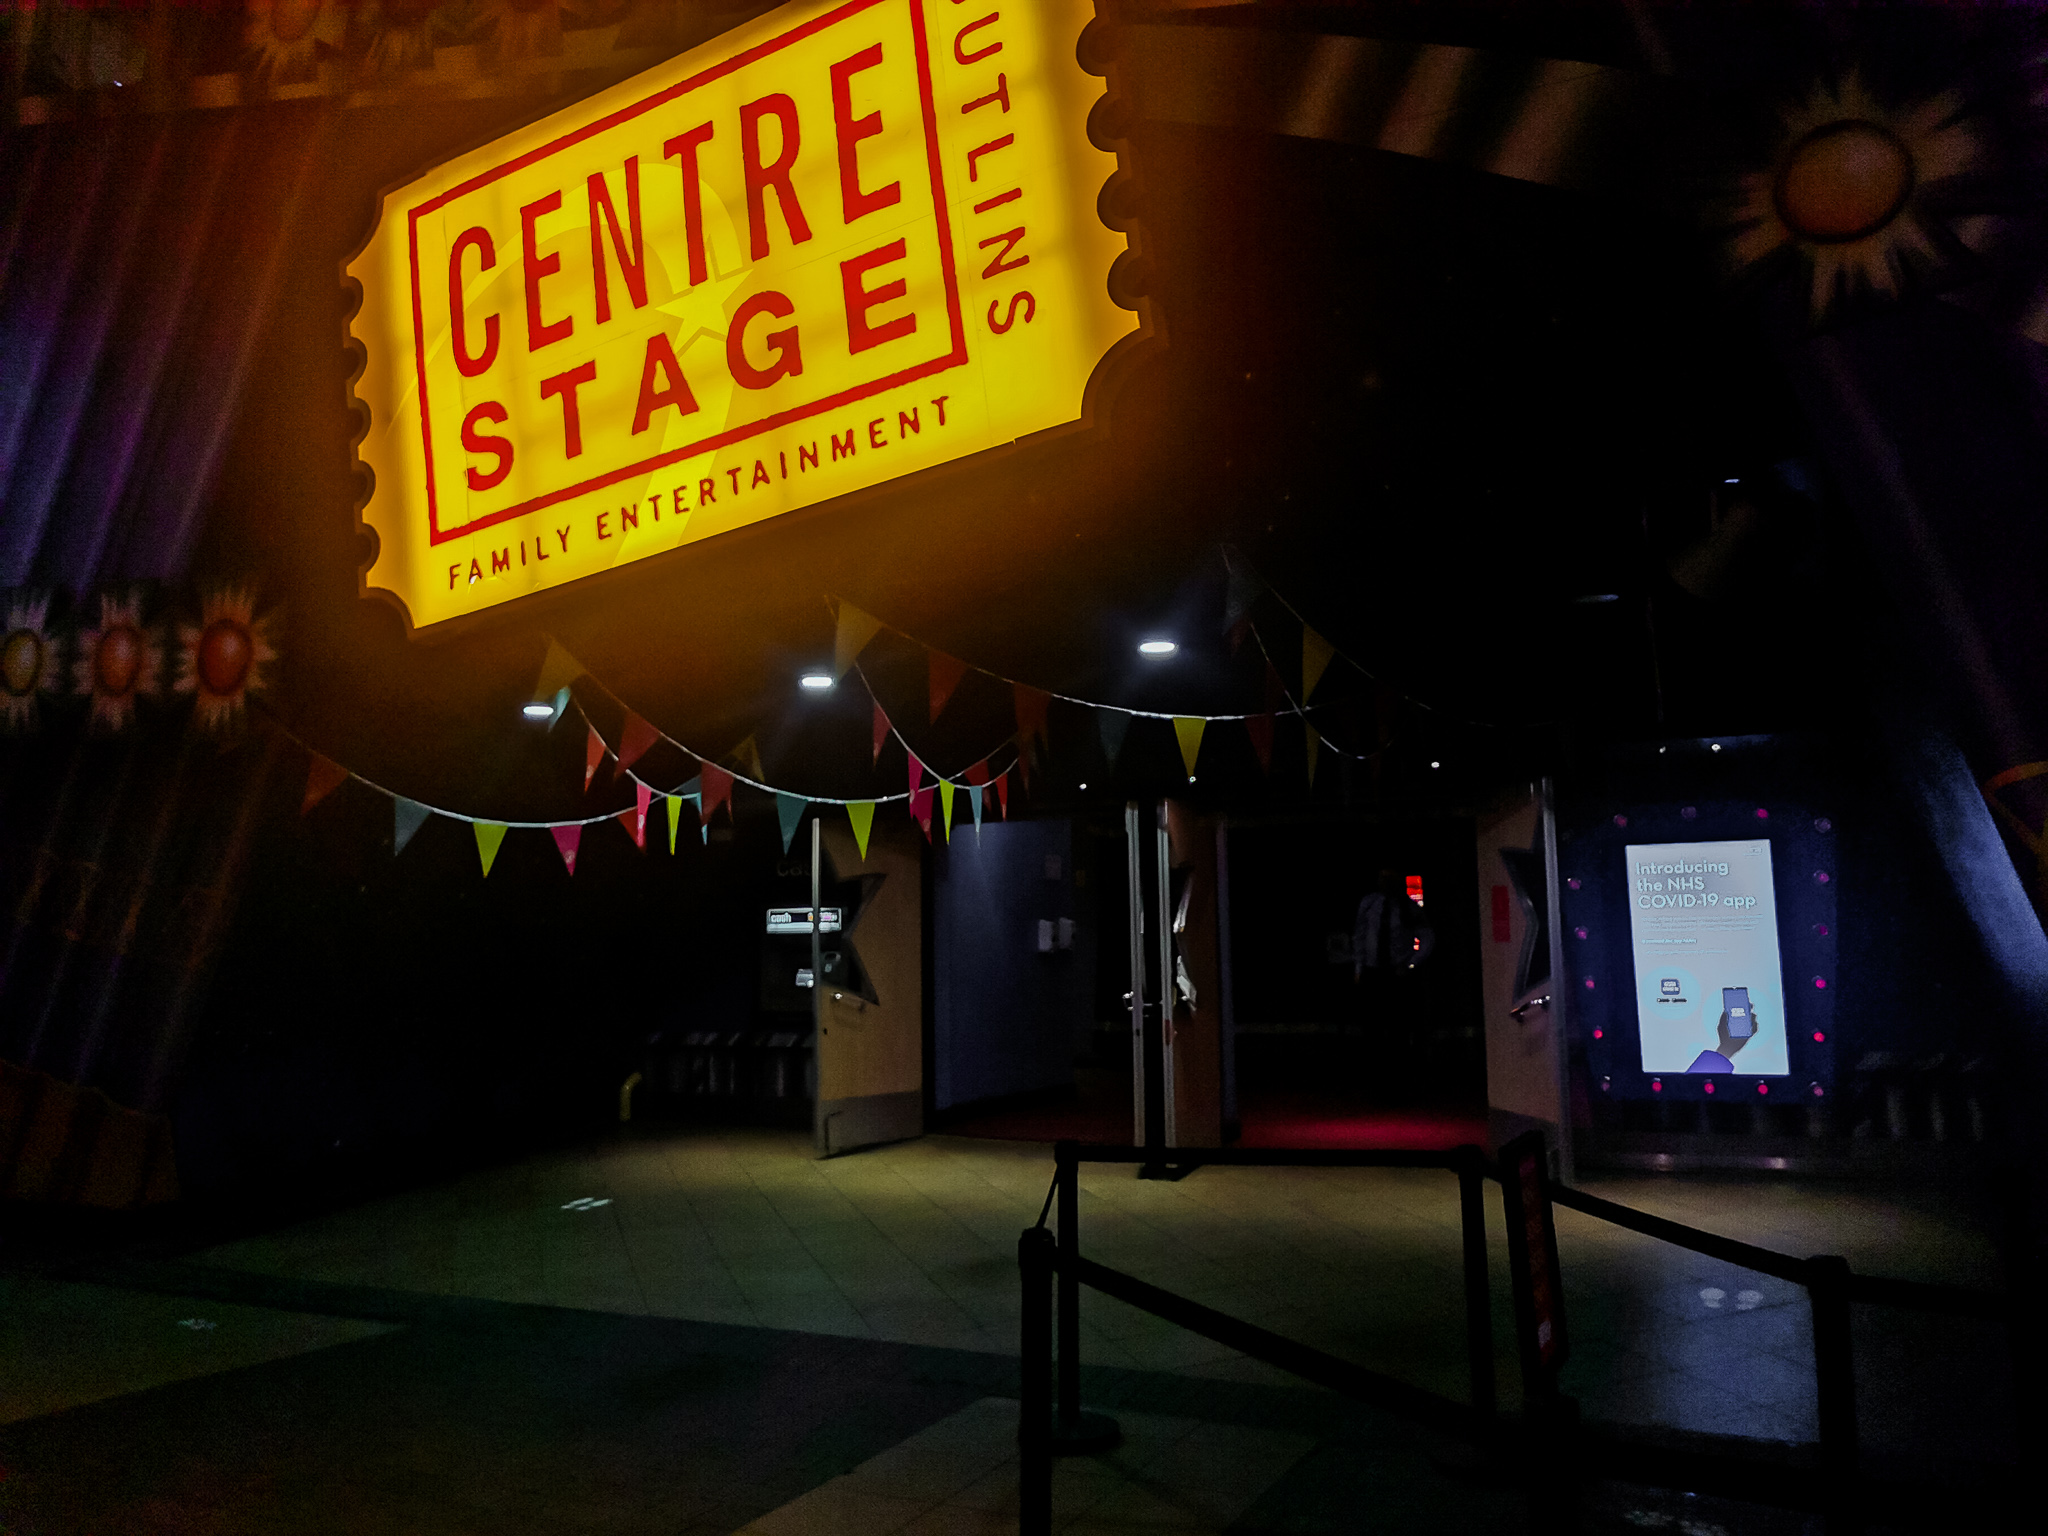 light up sign saying centre satage in yellow at a venue in Butlins Skegness